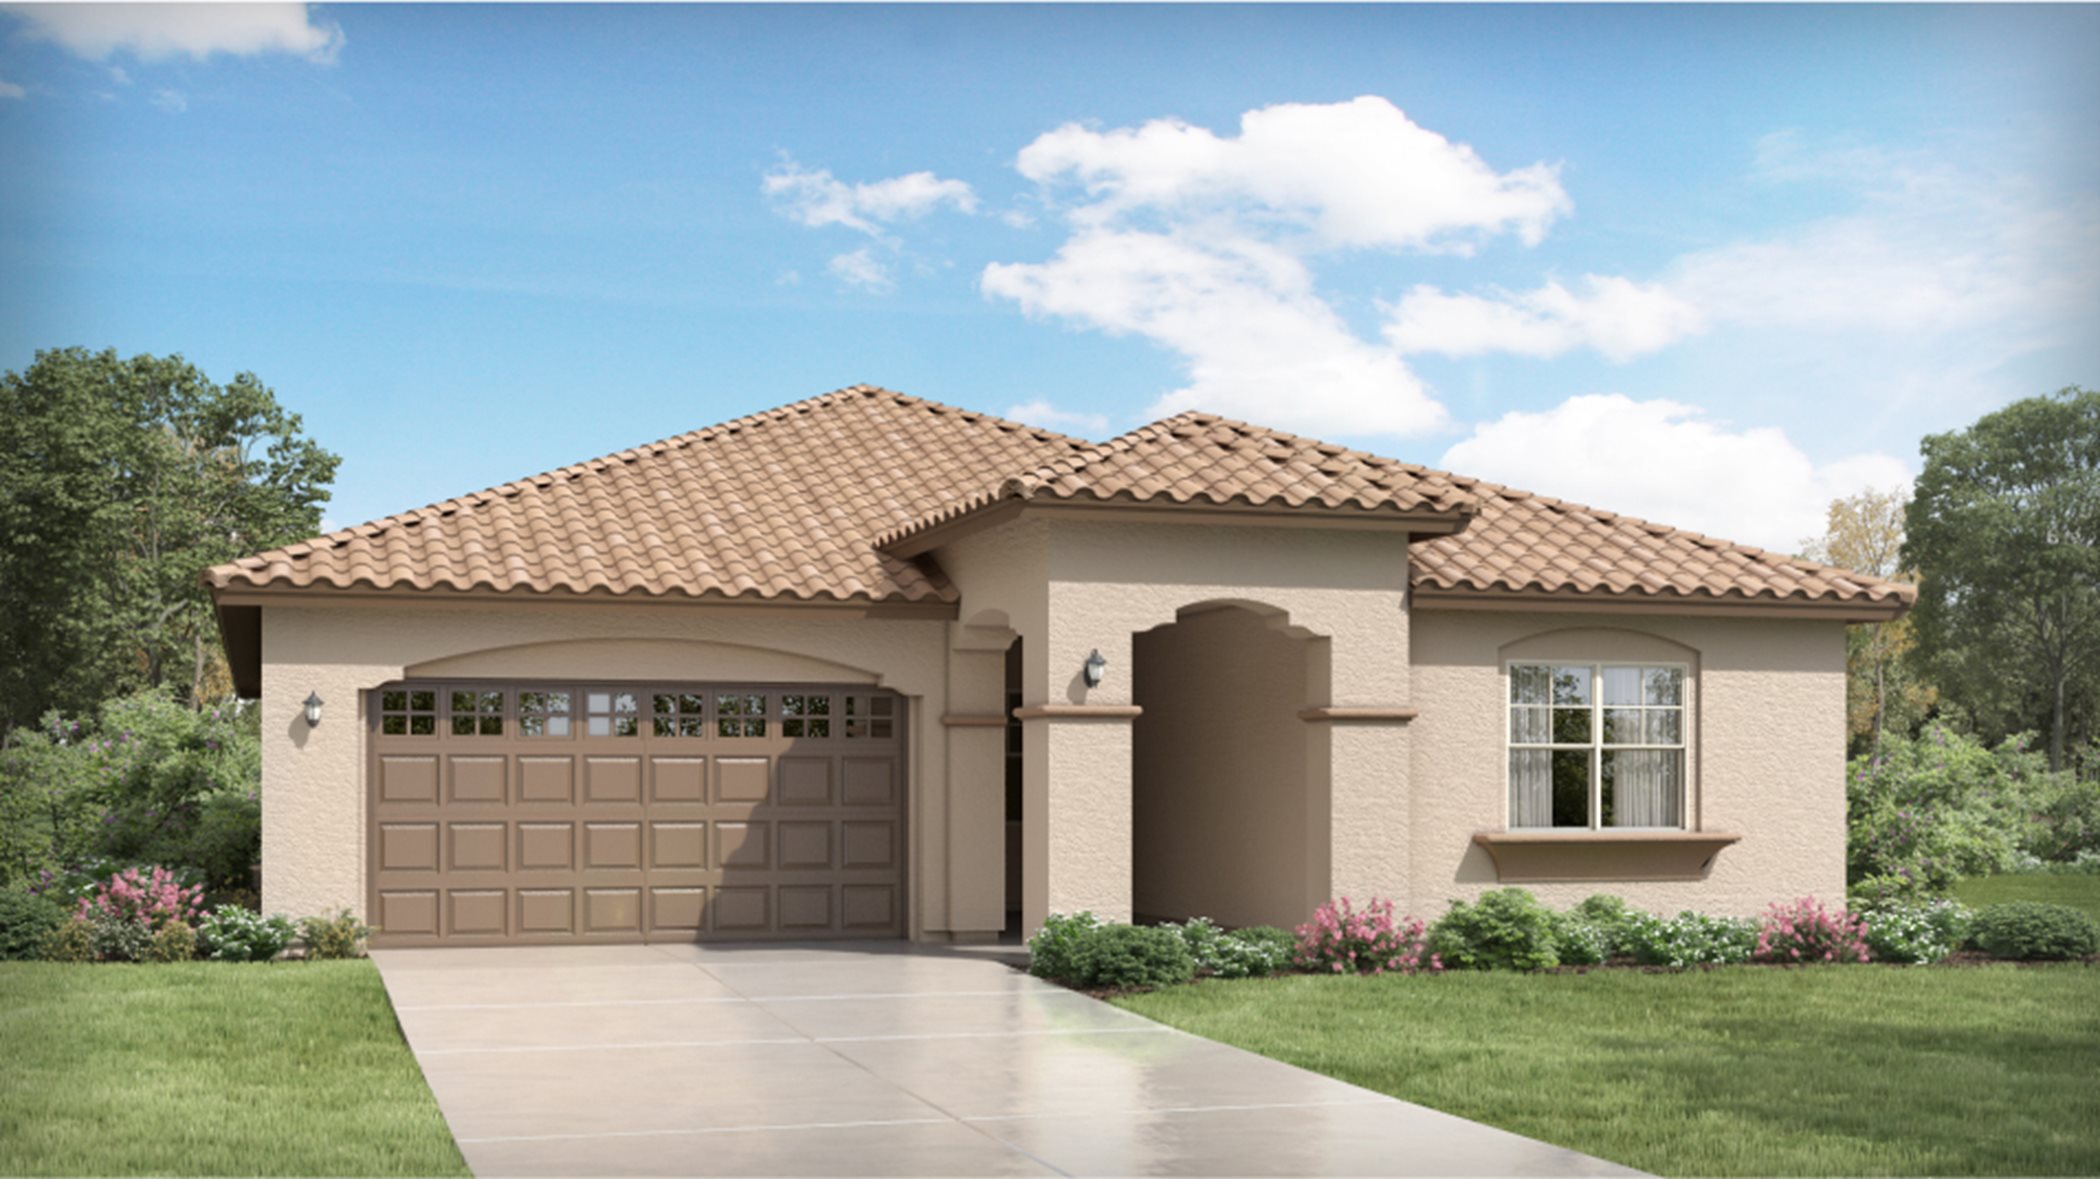 Cadence Signature Phase 2 Bering 4580 Spanish Colonial